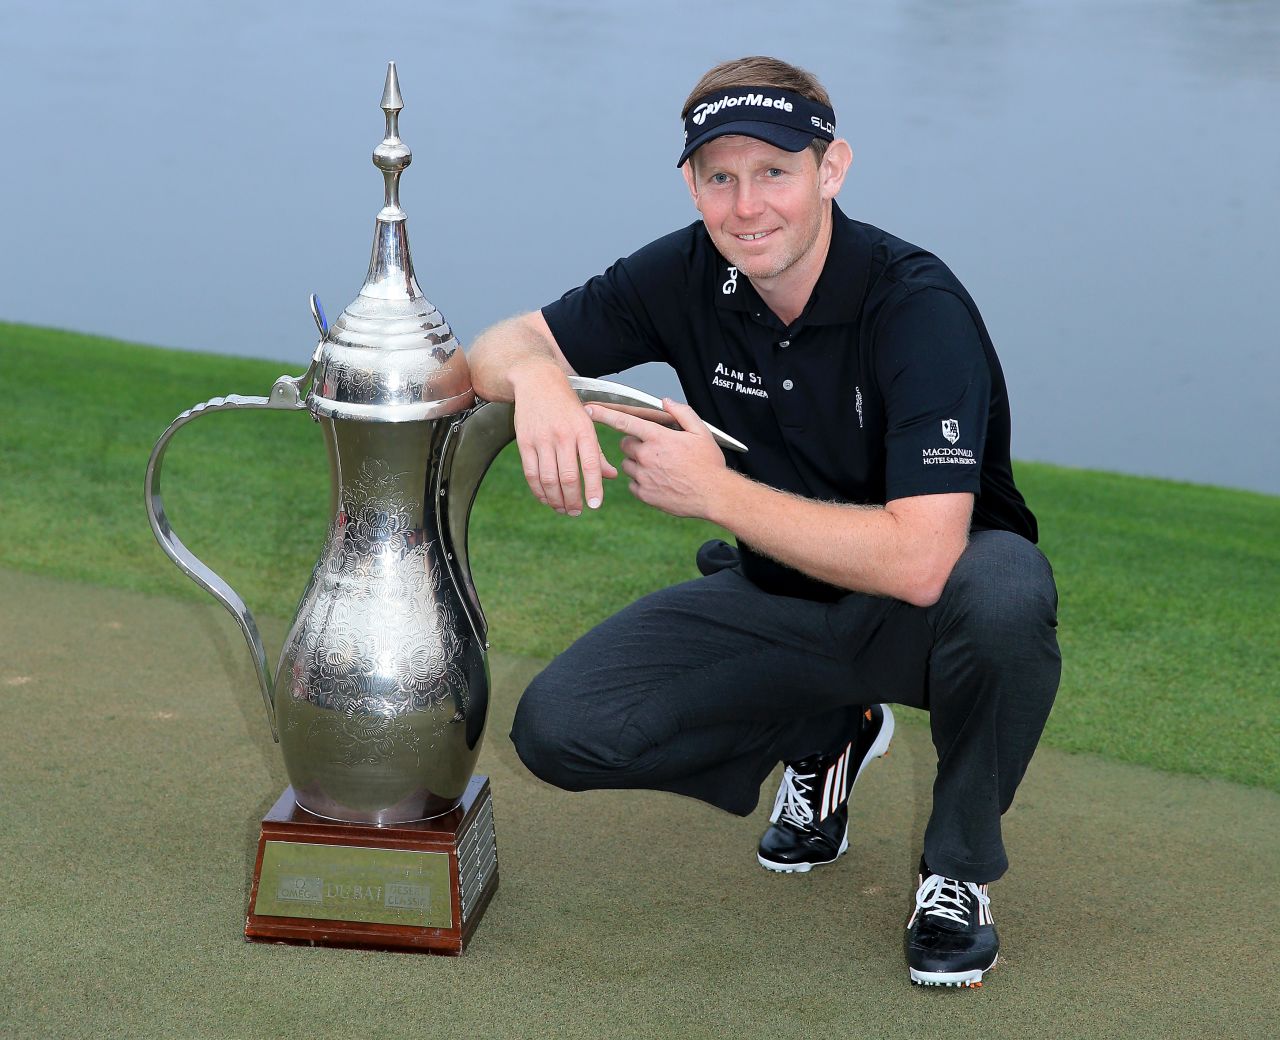 Stephen Gallacher will make his Ryder Cup debut at Gleneagles. The Scot will get the opportunity to play in front of his home crowd.